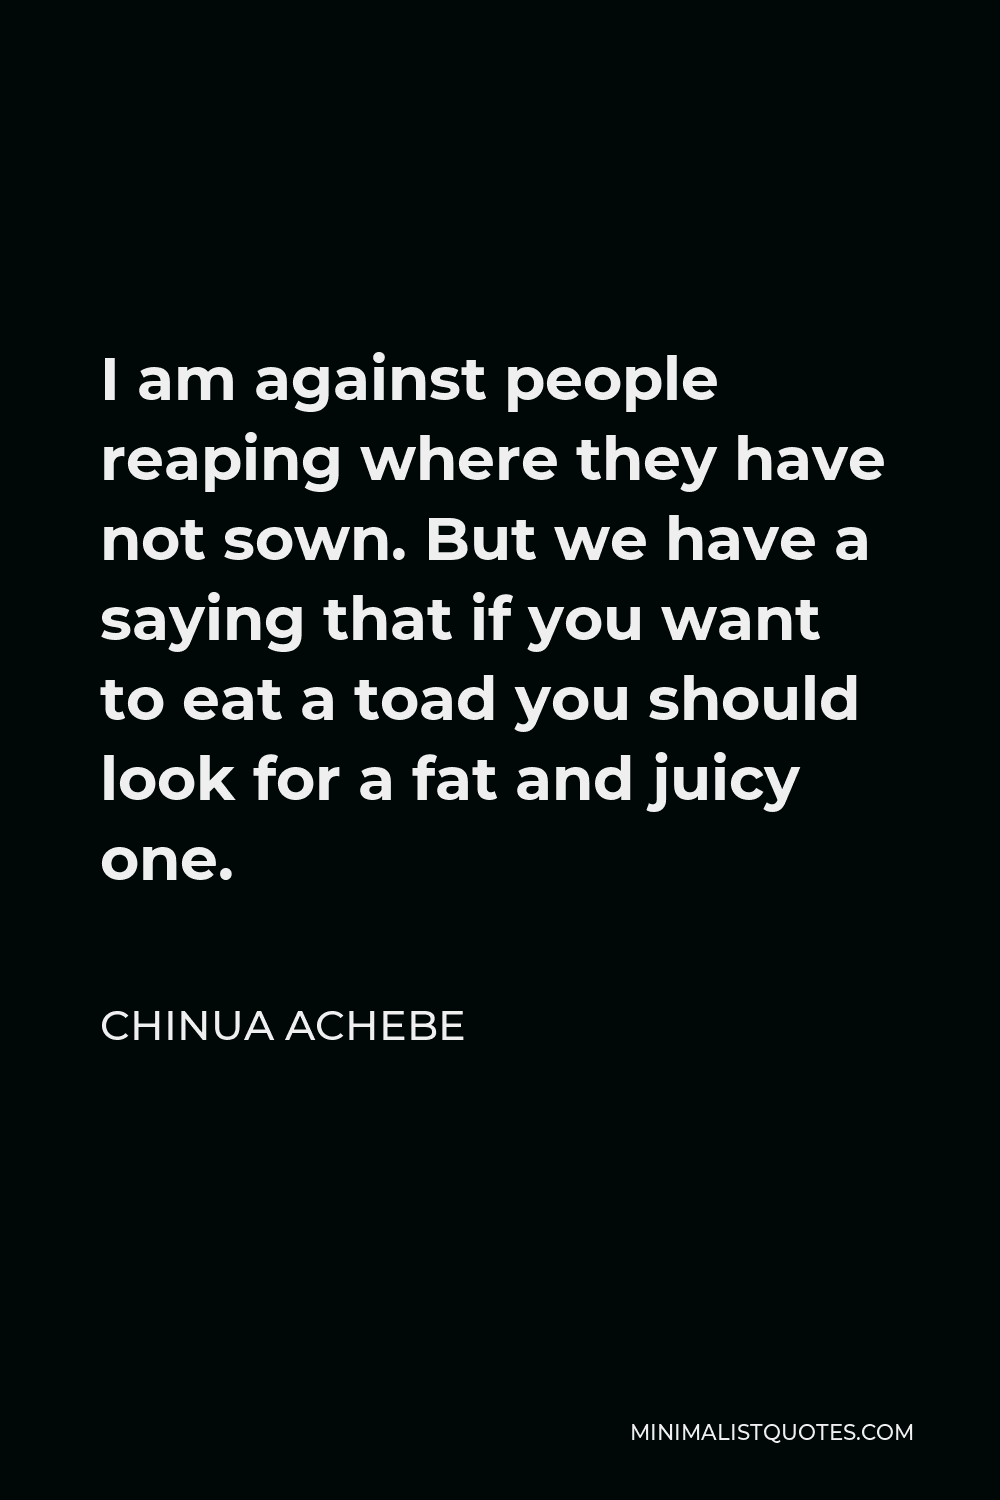 Chinua Achebe Quote - I am against people reaping where they have not sown. But we have a saying that if you want to eat a toad you should look for a fat and juicy one.